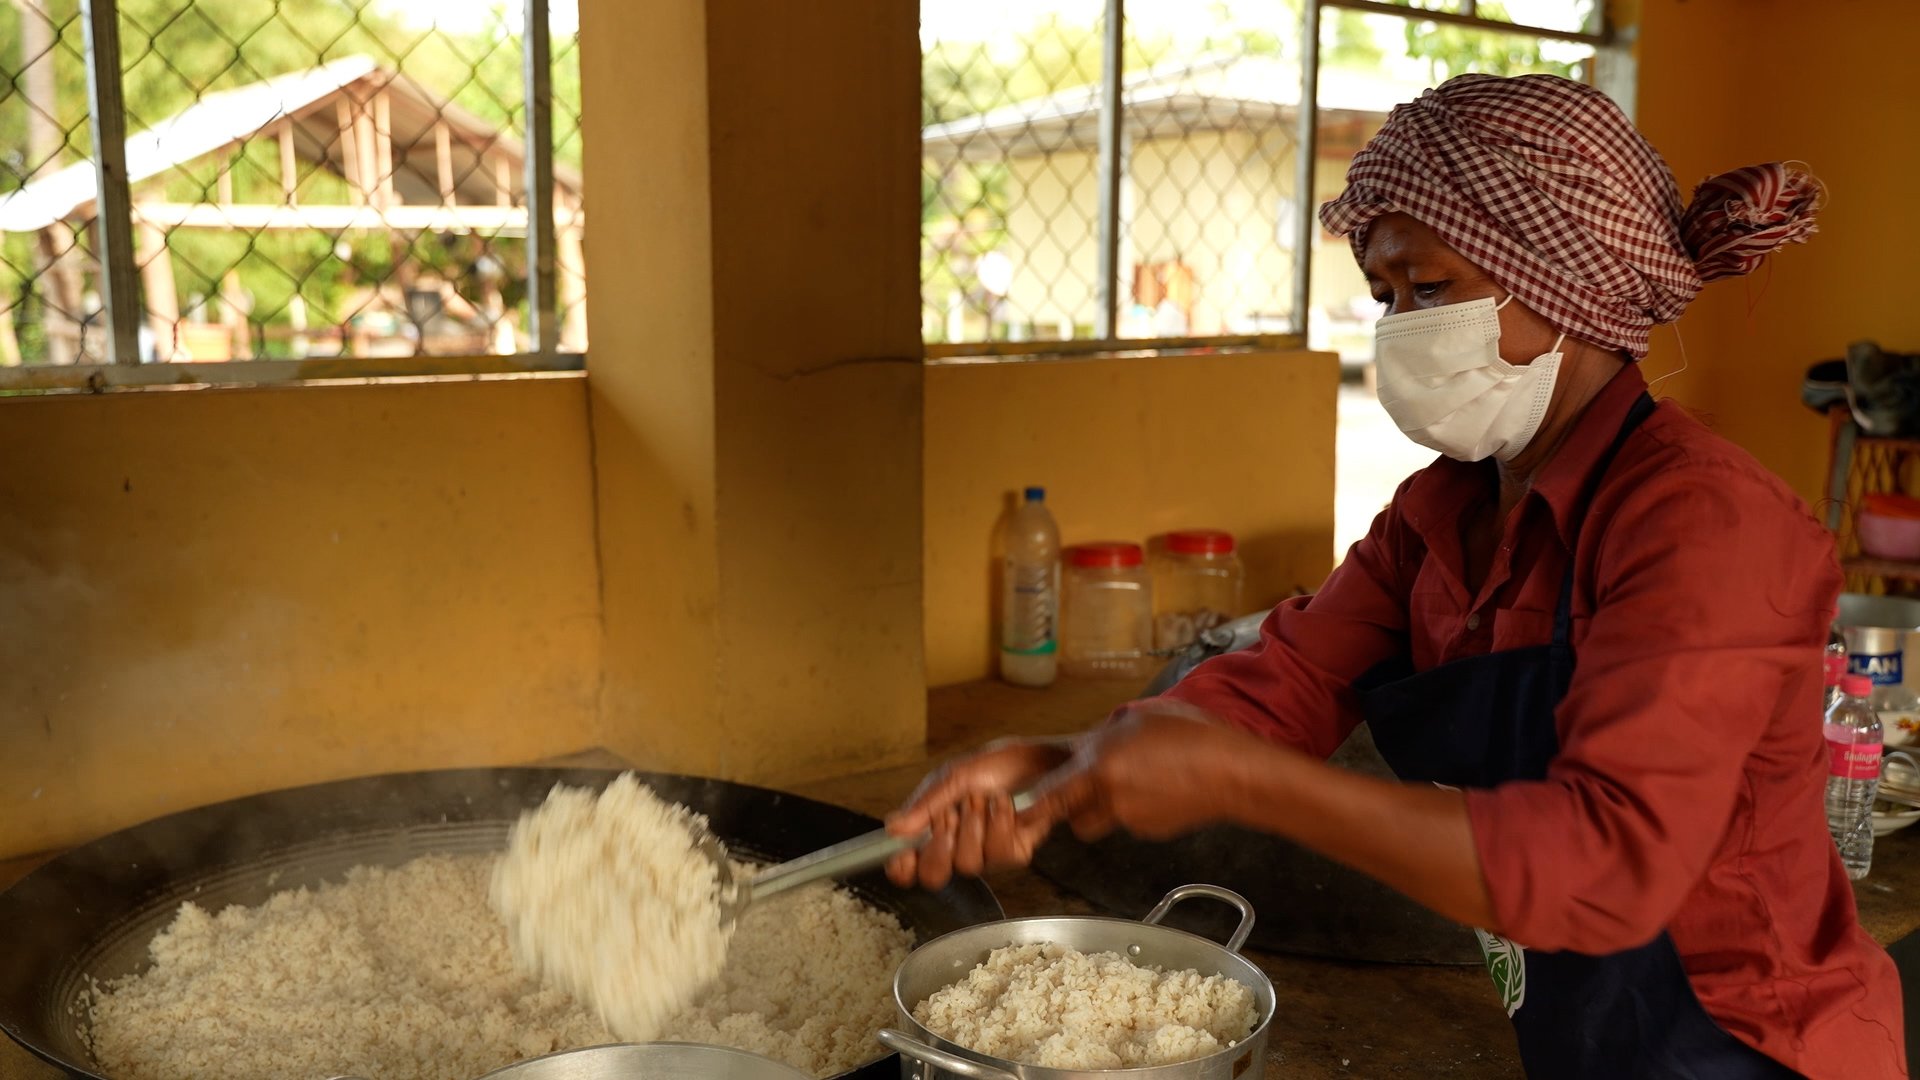 School cook puts rice into a bowl. Frame grab working as a cameraperson working for WFP Cambodia